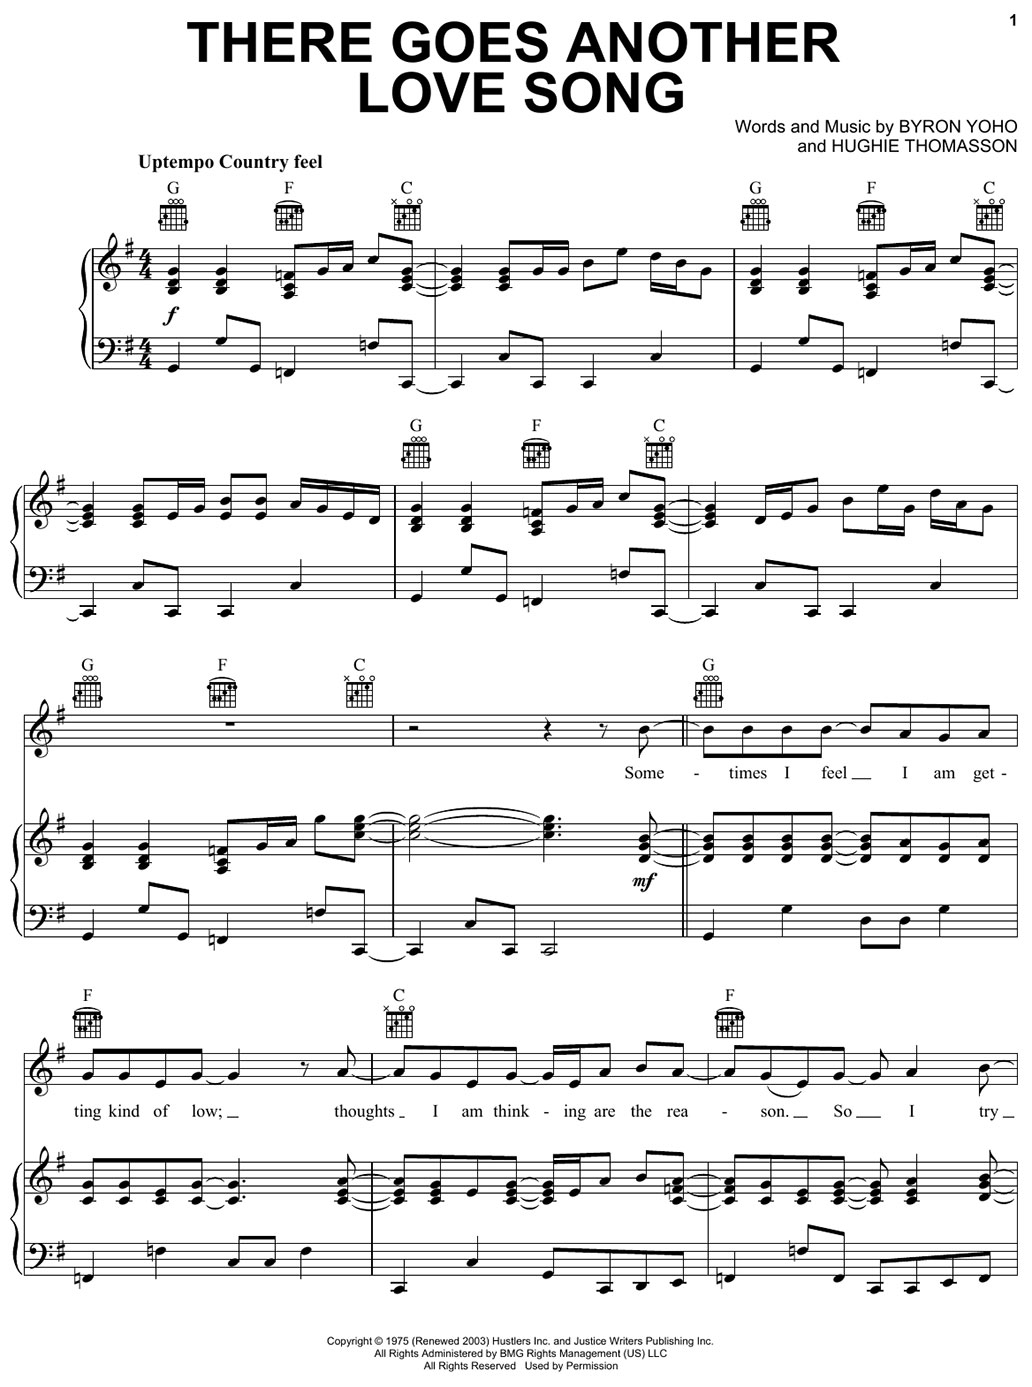 there goes another love song piano sheet music notes